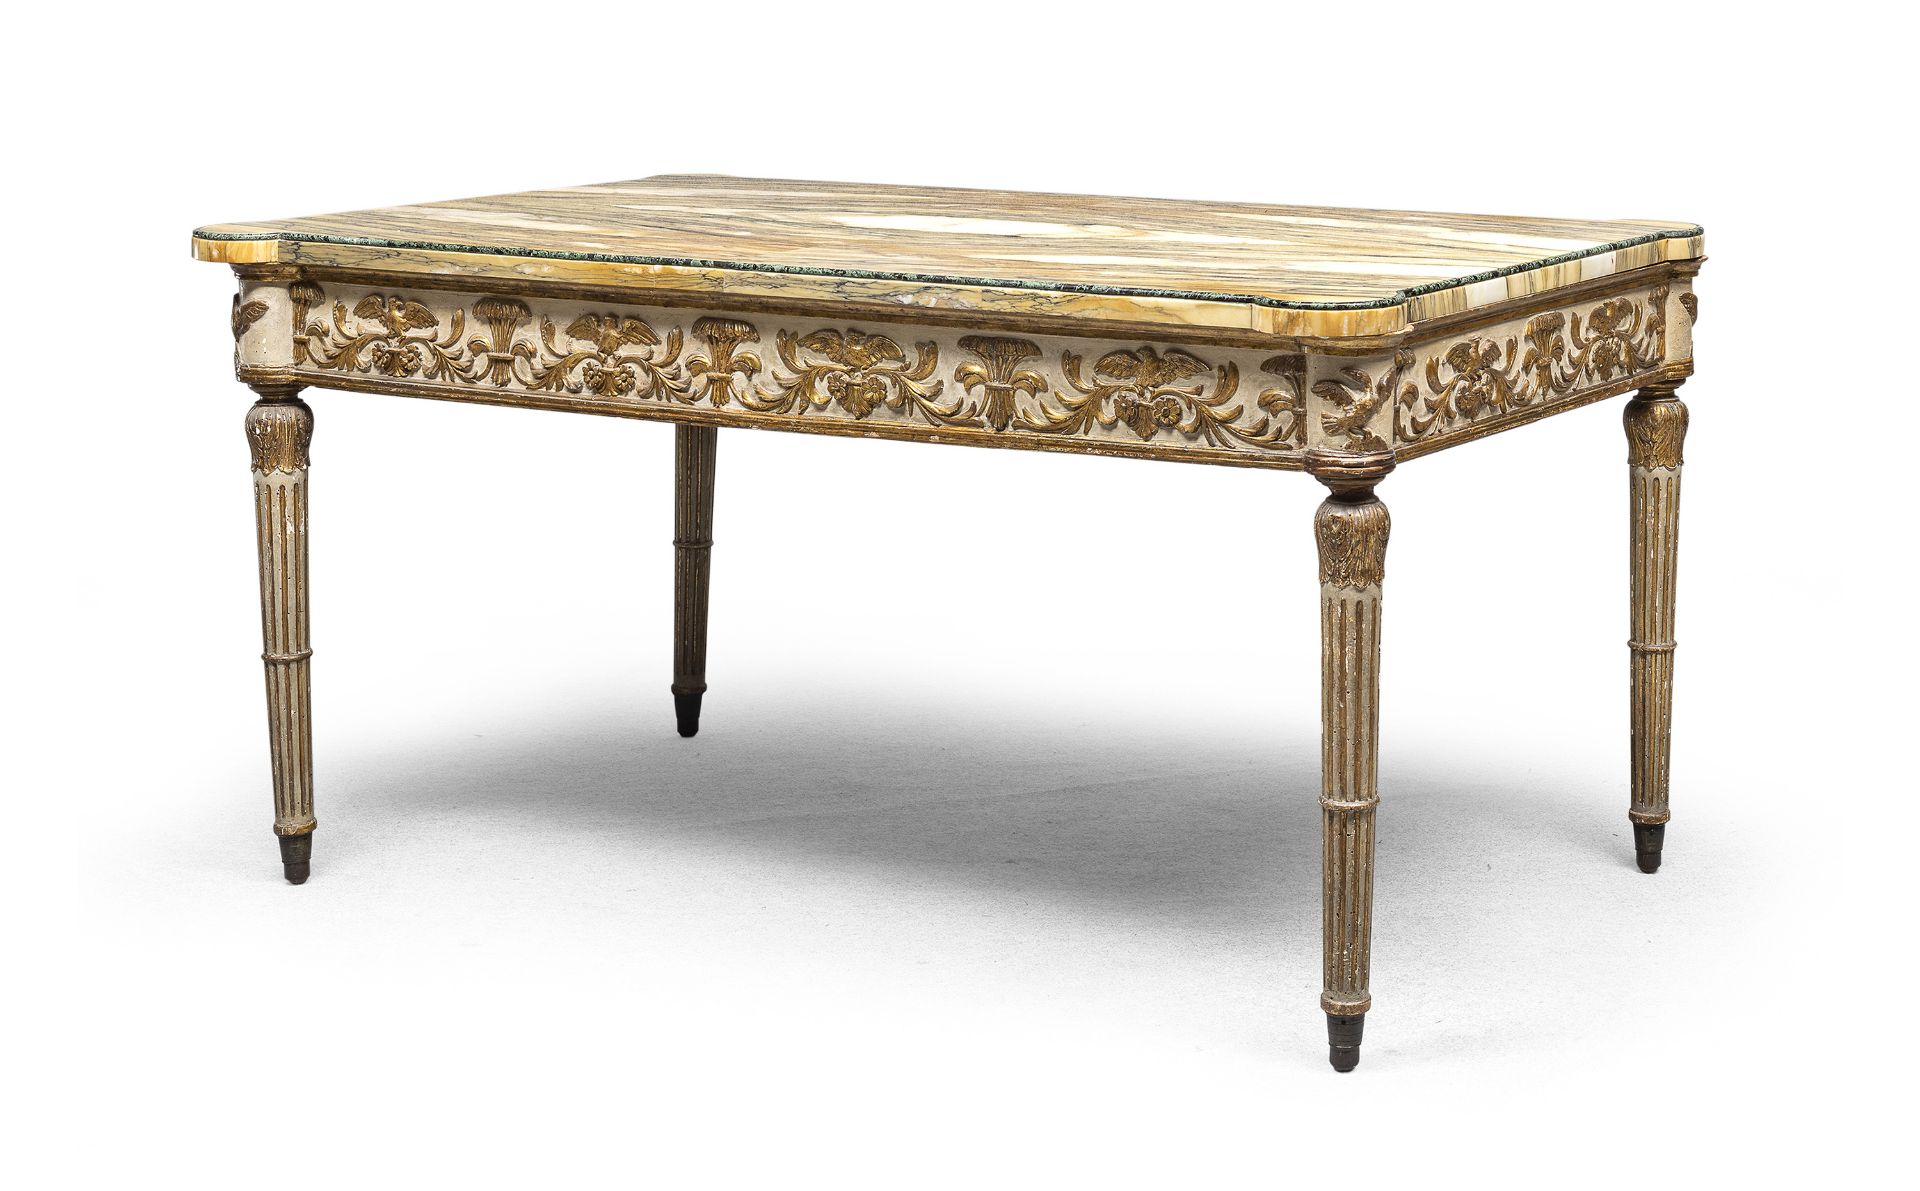 WOODEN WHITE AND GOLD LACQUER COFFEE TABLE NAPLES END OF THE 18TH CENTURY